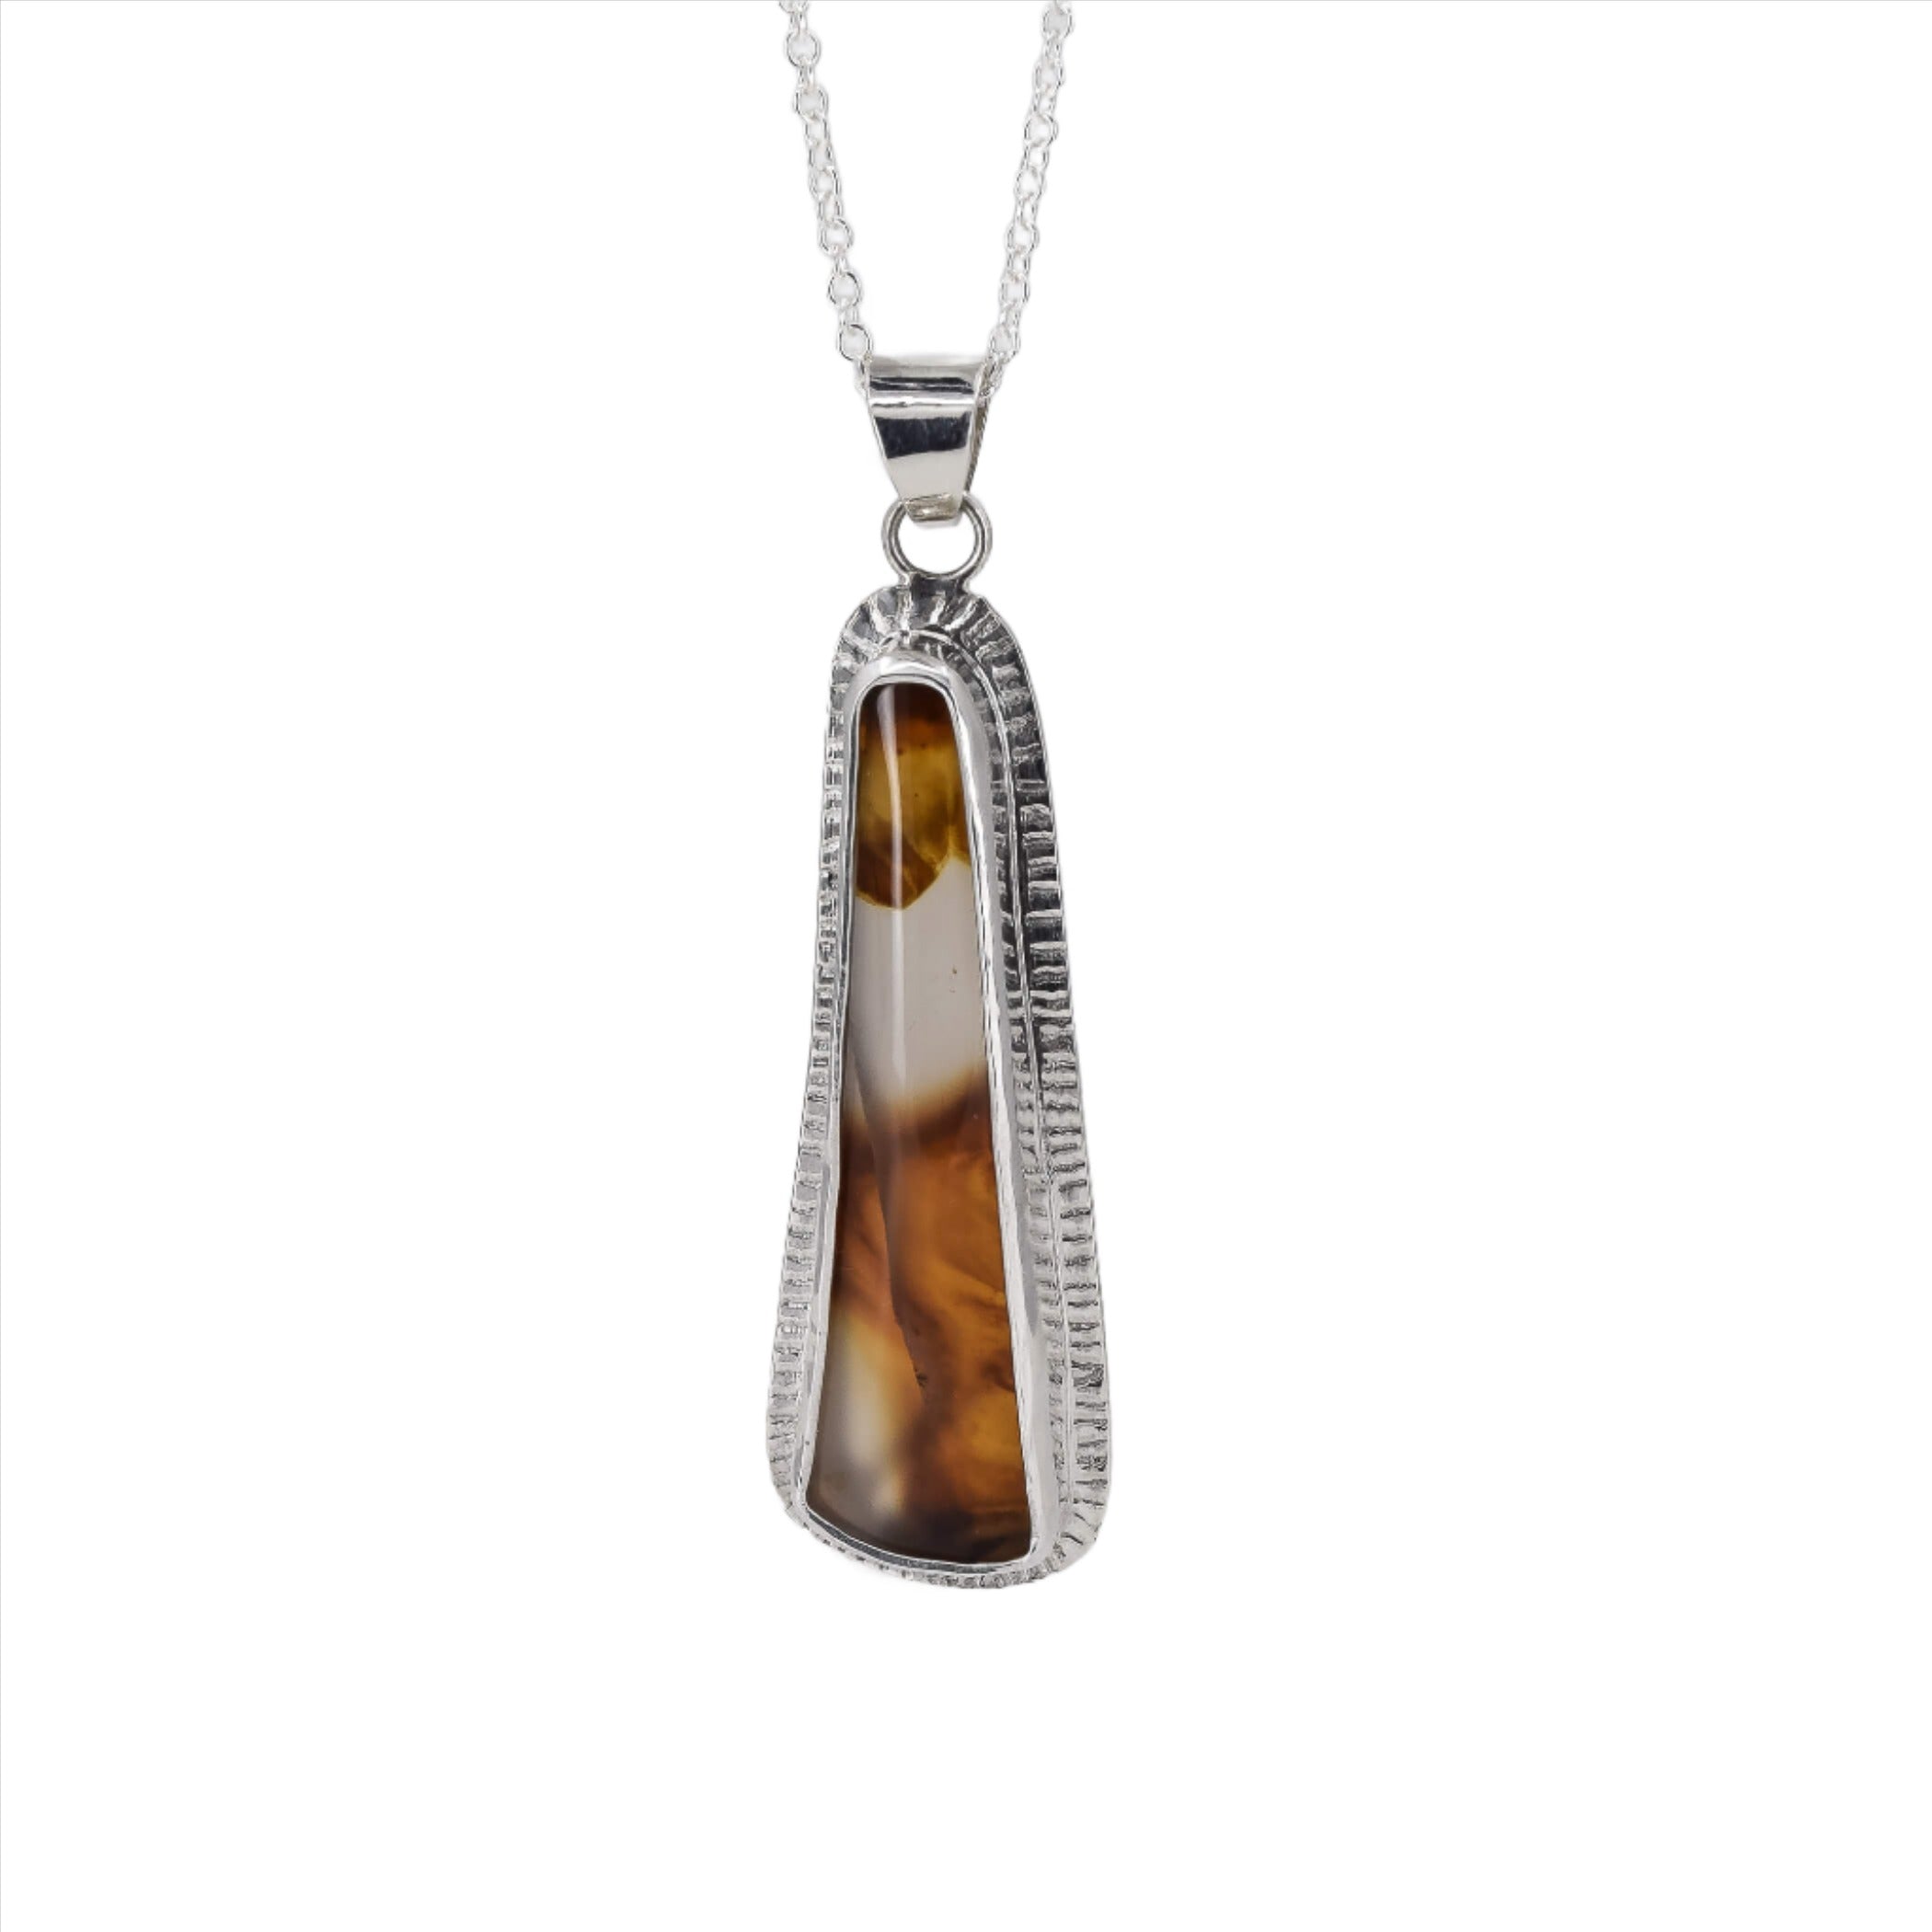 Montana agate sterling silver pendant necklace with a textured border